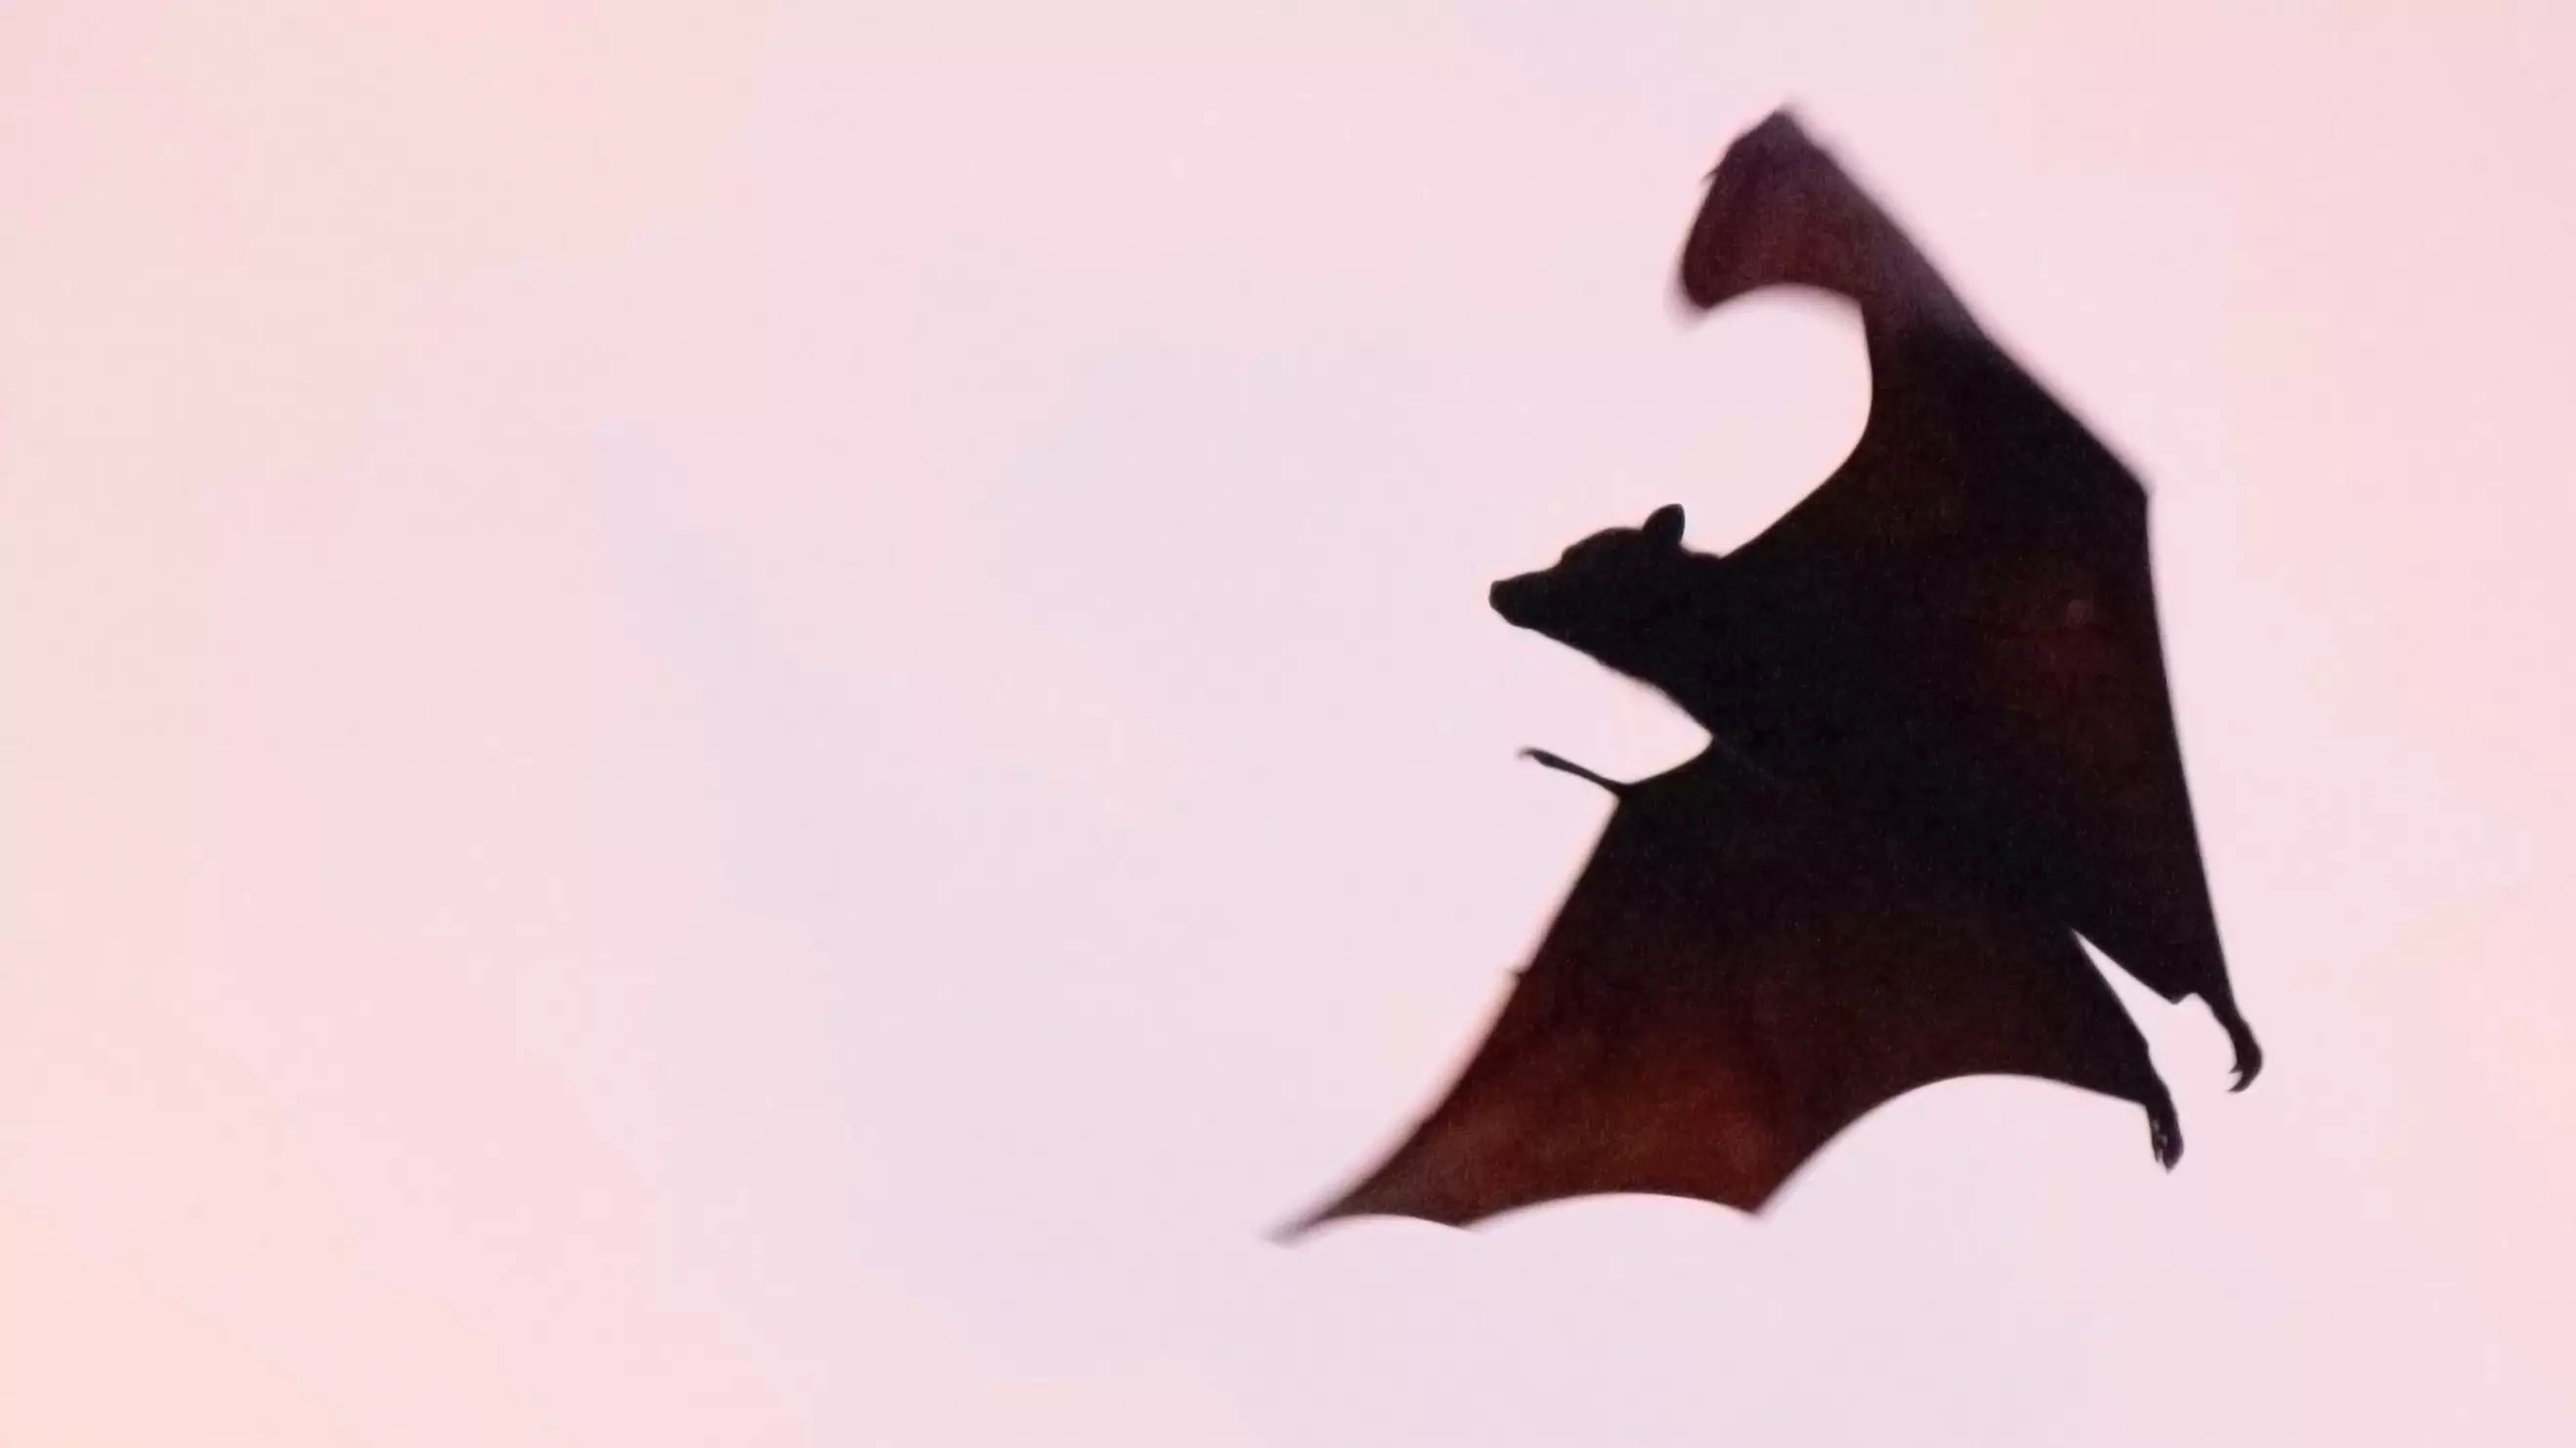 A Bat Snuck Onto A Plane And It's The Scariest Thing You'll See Today